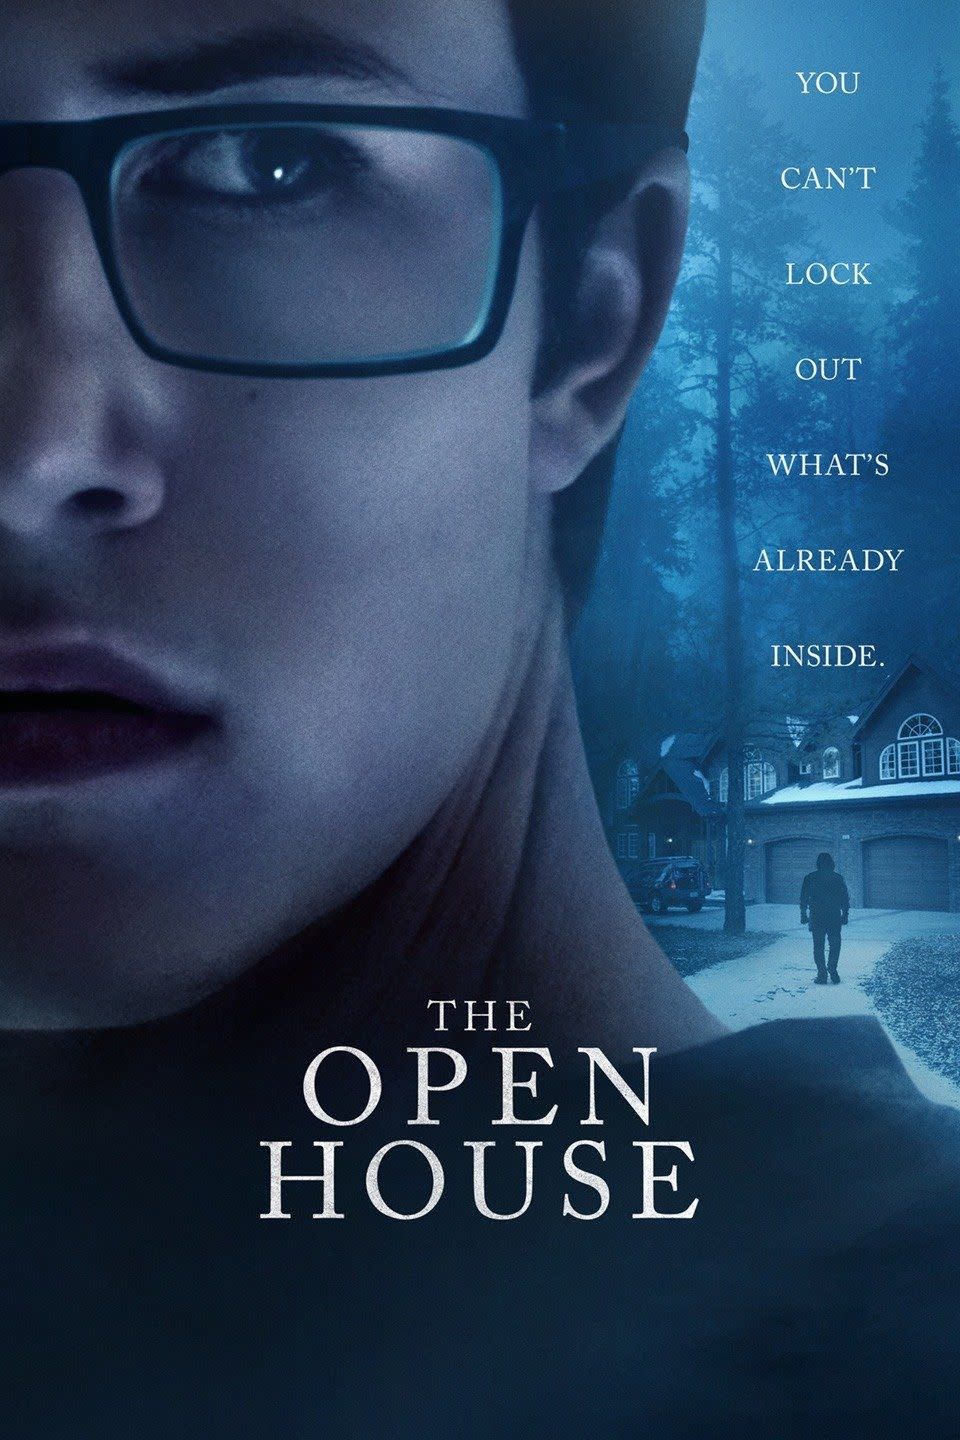 9) The Open House (2018)